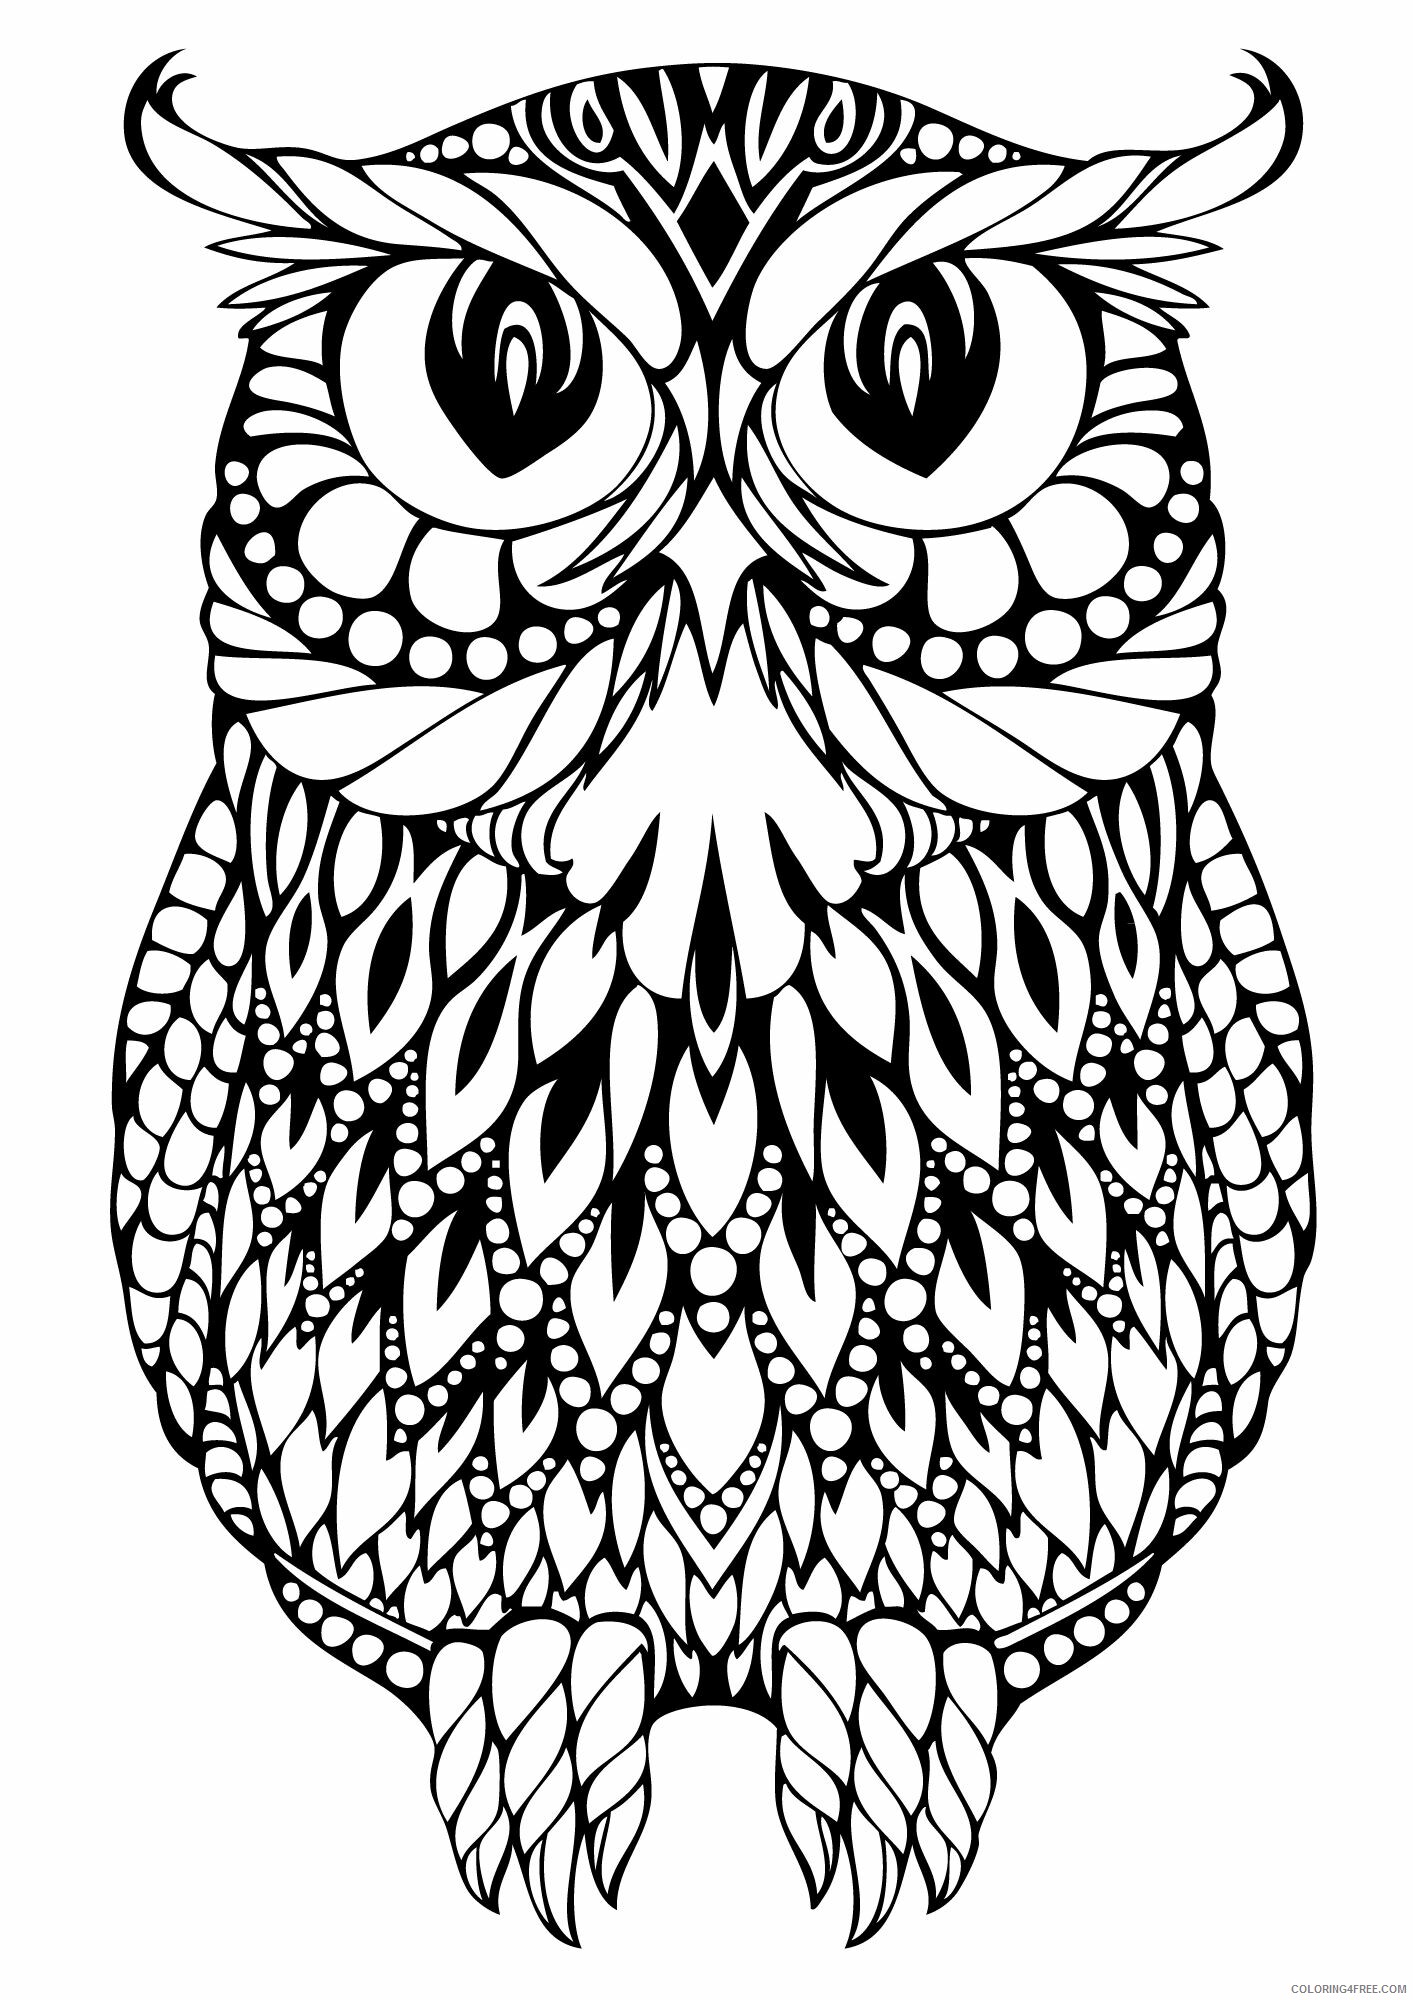 Owl Coloring Sheets Animal Coloring Pages Printable 2021 3017 Coloring4free